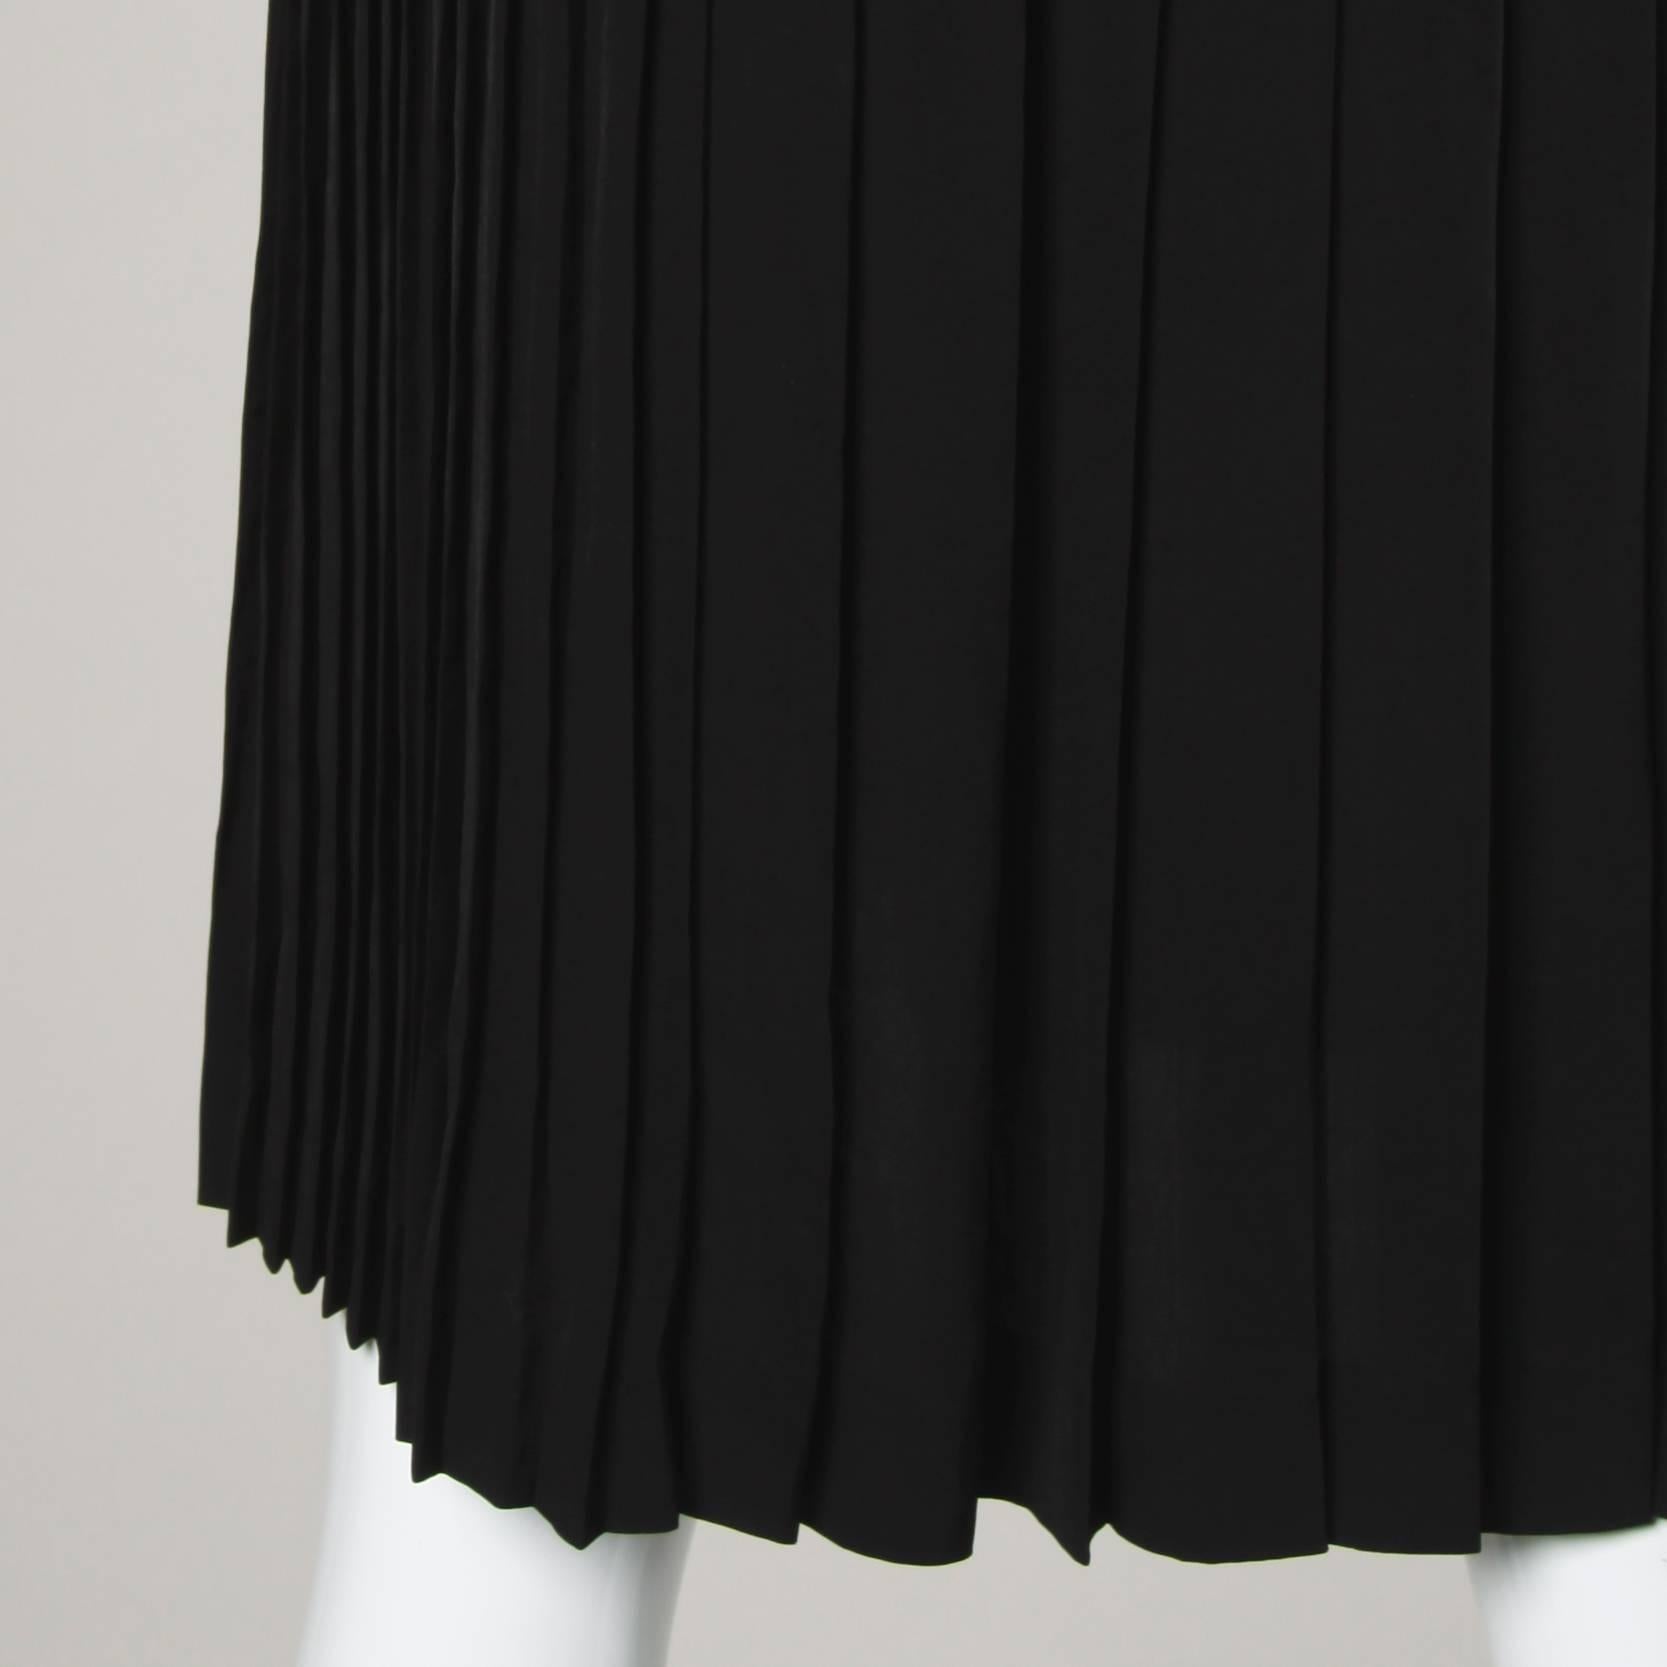 Simple and chic black Prada skirt with back pleating.

Details:

Unlined
Closure: Side Zip and Hook Closure
Marked Size: 38
Estimated Size: Small-Medium
Color: Black
Fabric: 100% Triacetate 
Label: Prada

Measurements:

Waist: